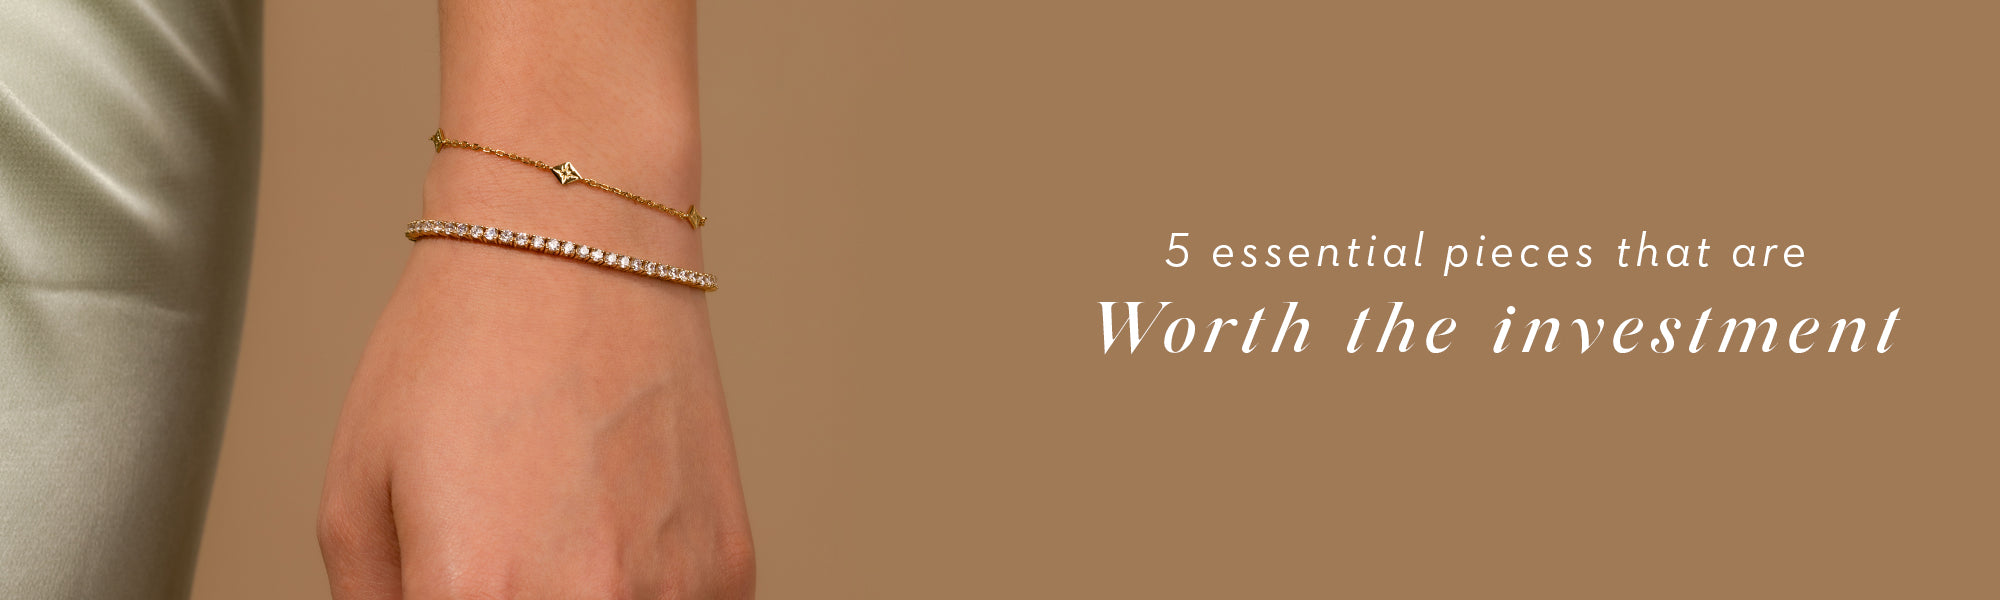 5 Essential Pieces That Are Worth The Investment